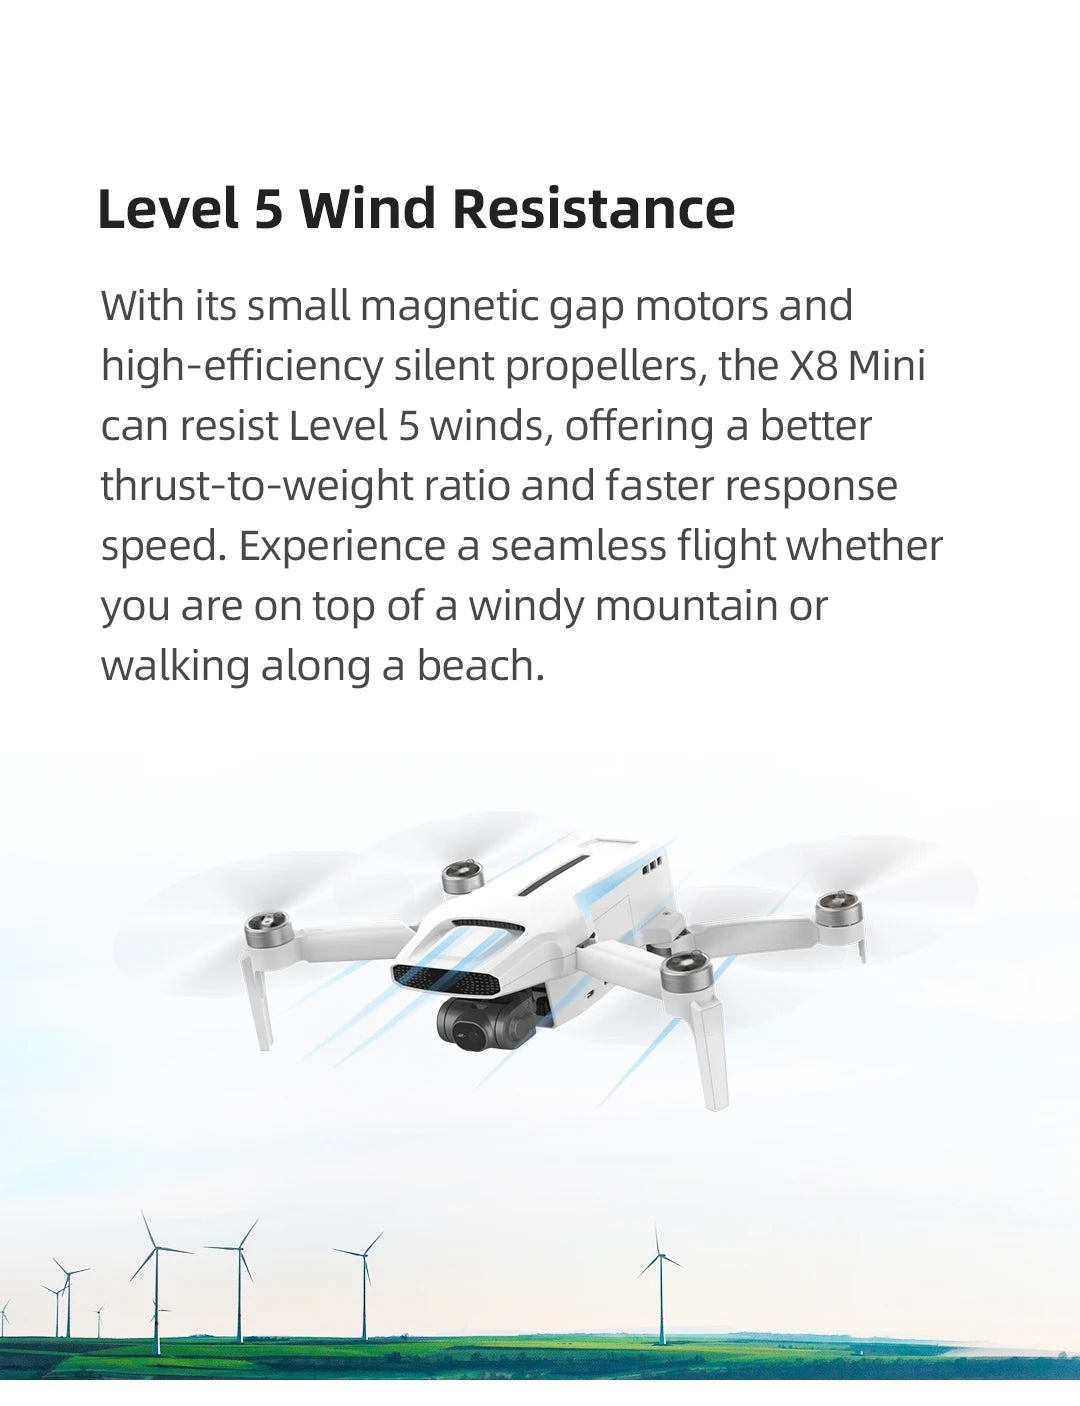 FIMI X8 Mini Drone, the X8 Mini can resist Level 5 winds, offering a better thrust-to-